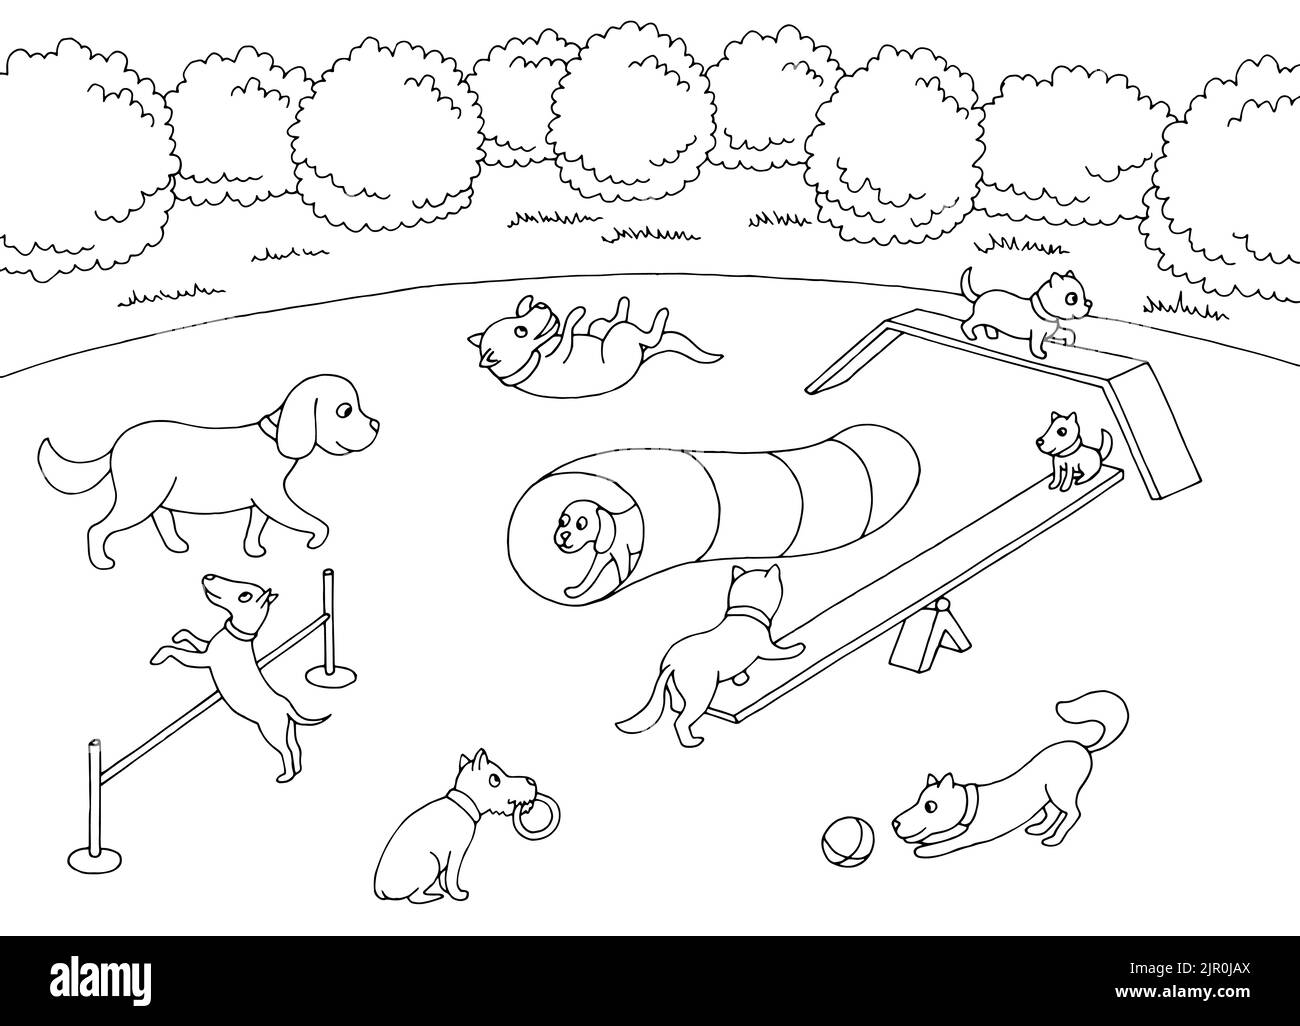 Dog play on playground graphic black white sketch landscape illustration vector Stock Vector